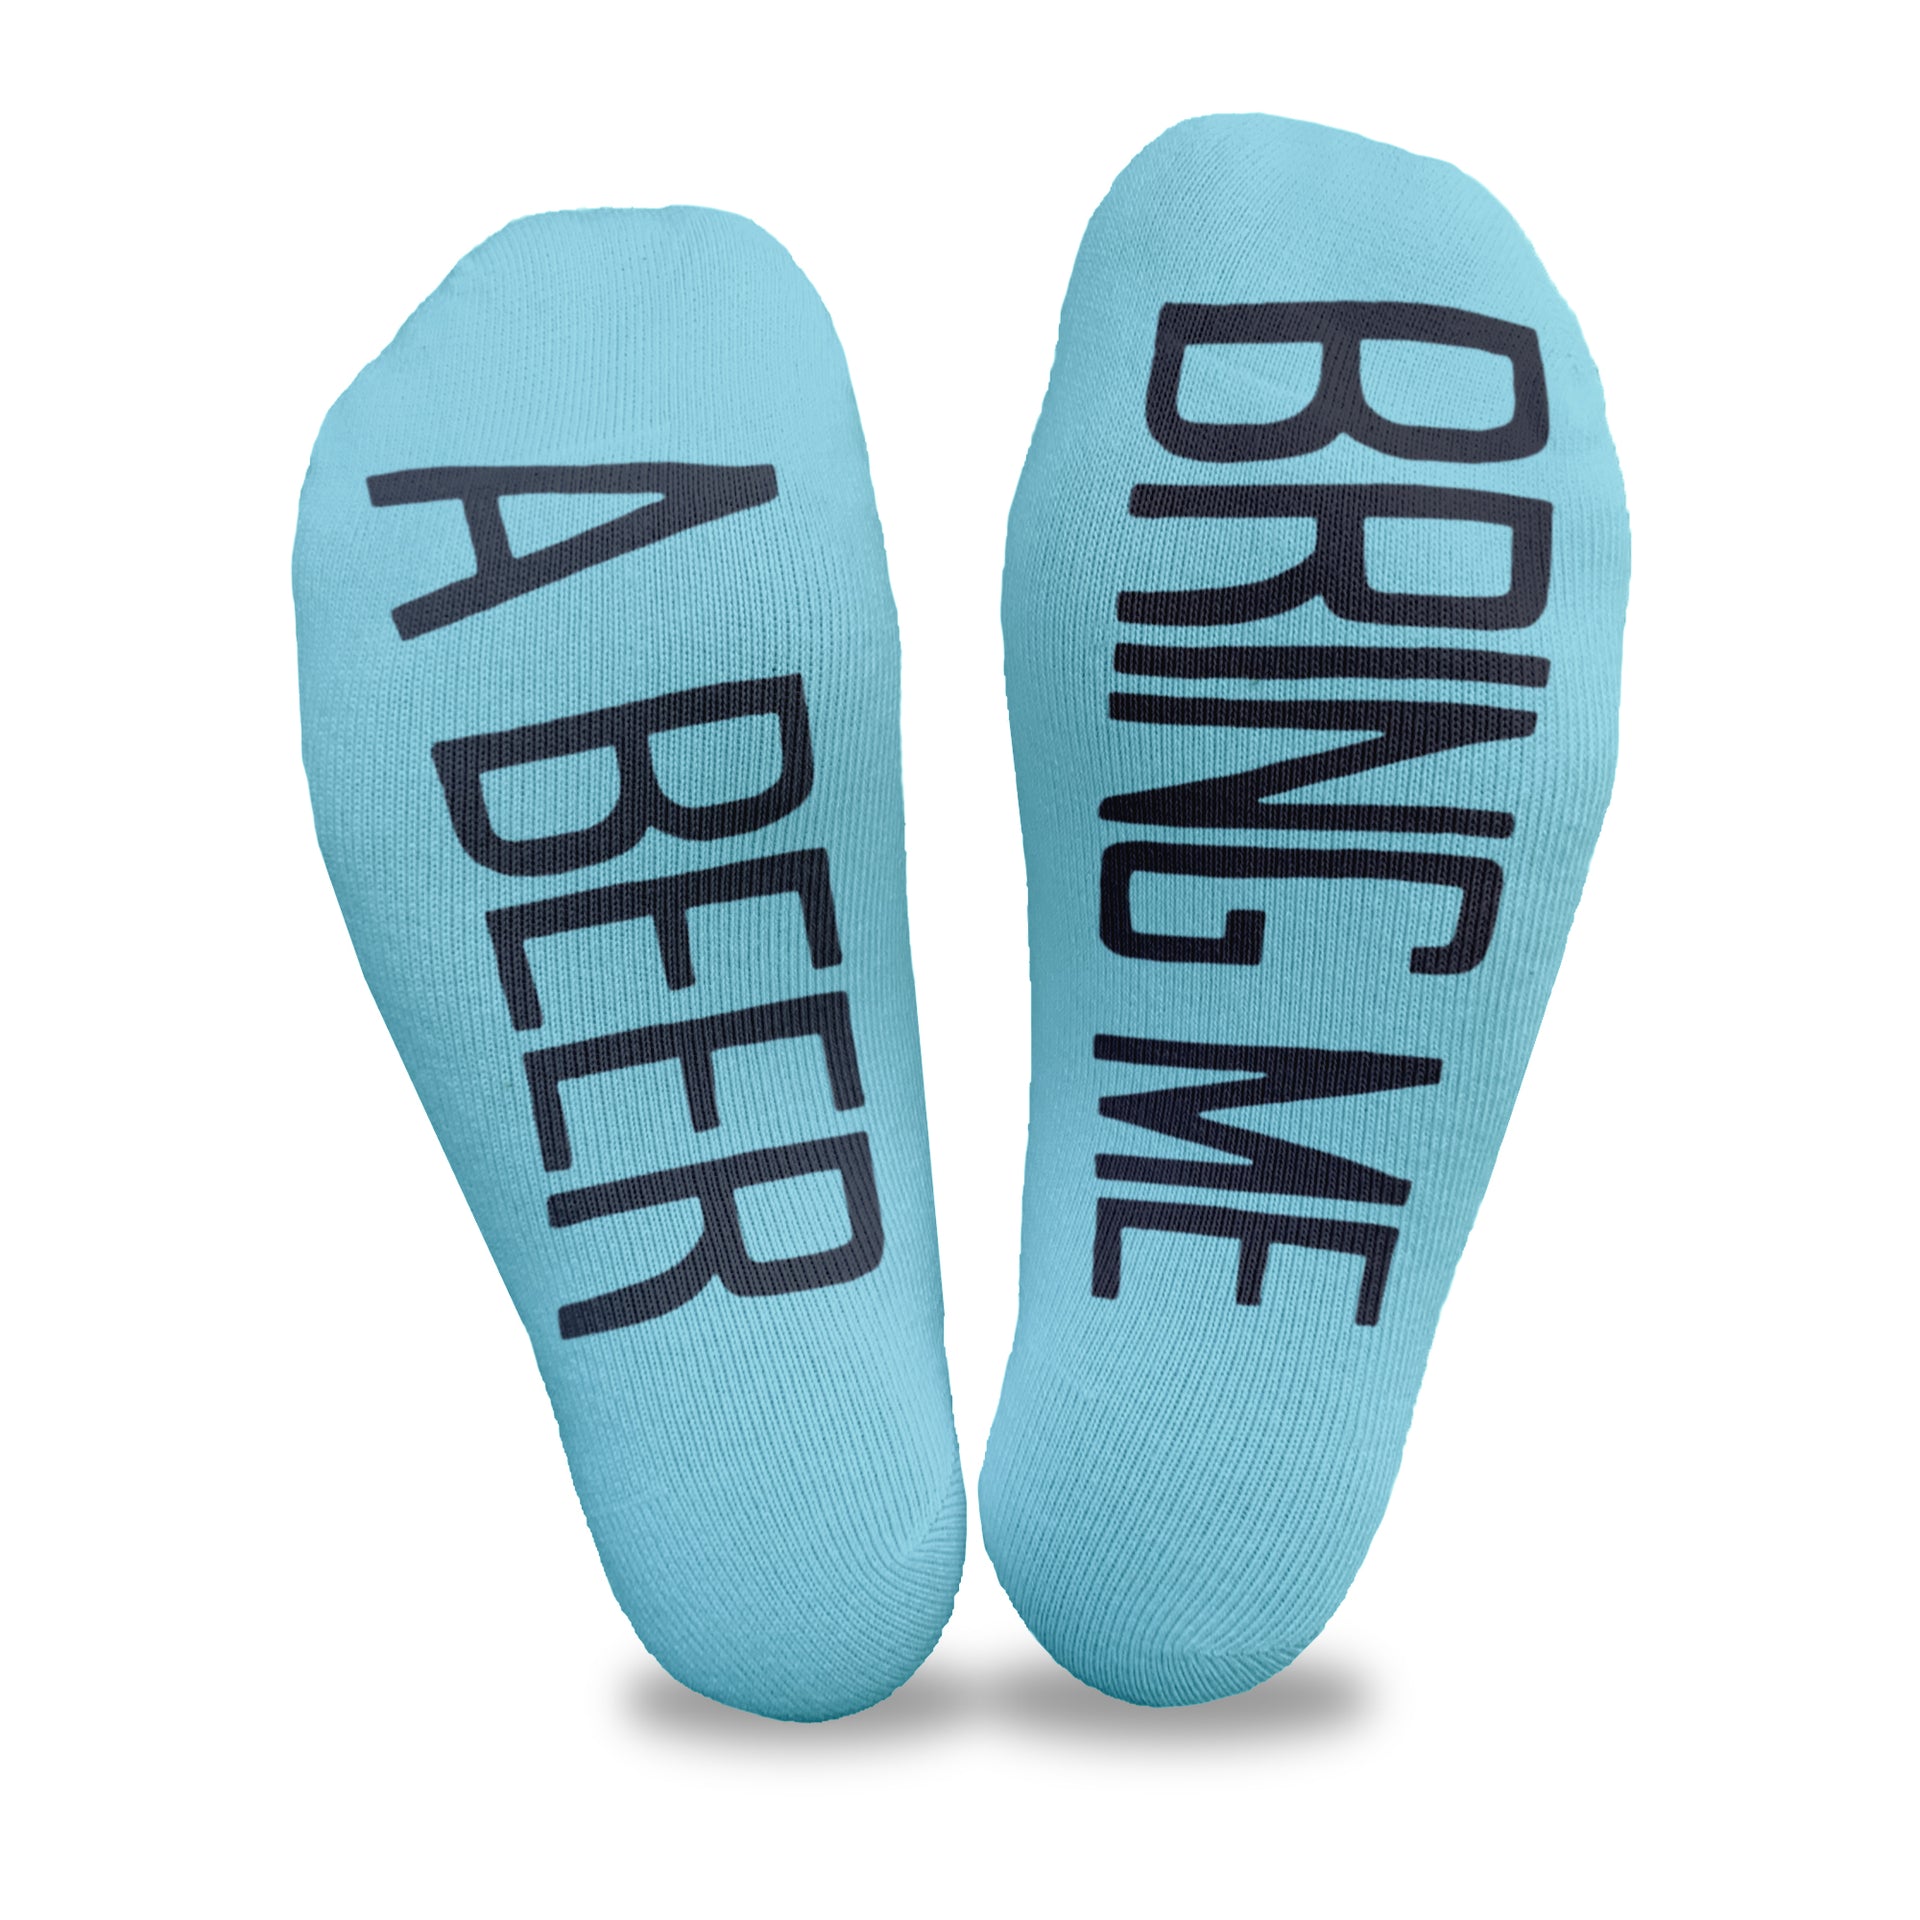 Custom printed bring me a beer on the bottom of cotton turquoise no show footie socks makes a fun gift idea for your spouse.